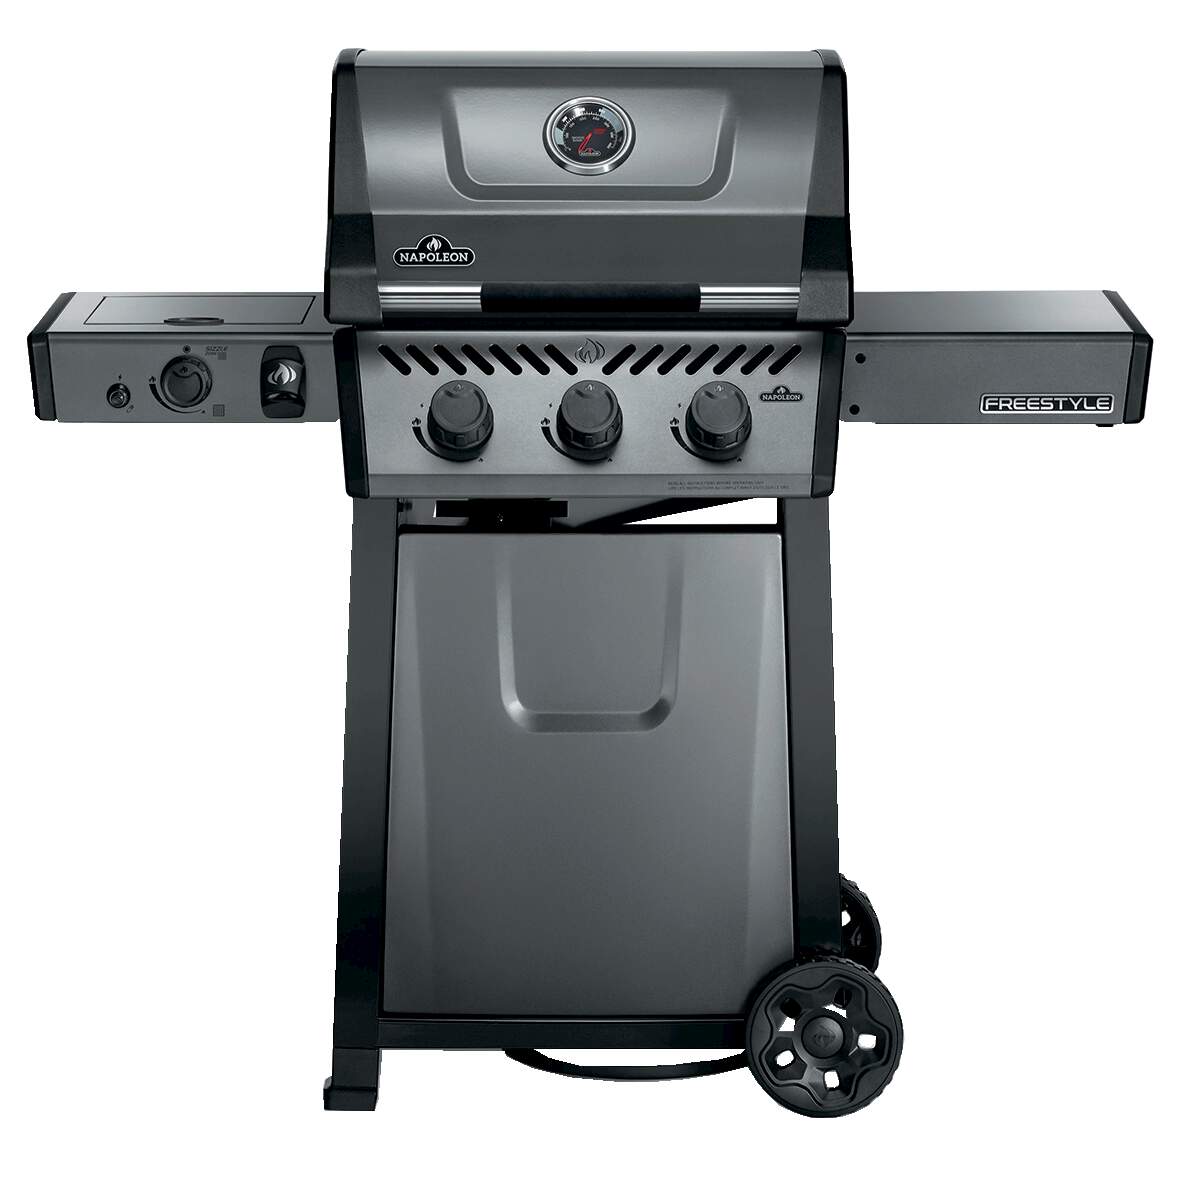 1270076 - Gasgrill Freestyle 365 graphit m. Sizzle Zone 3 Hauptbrenner